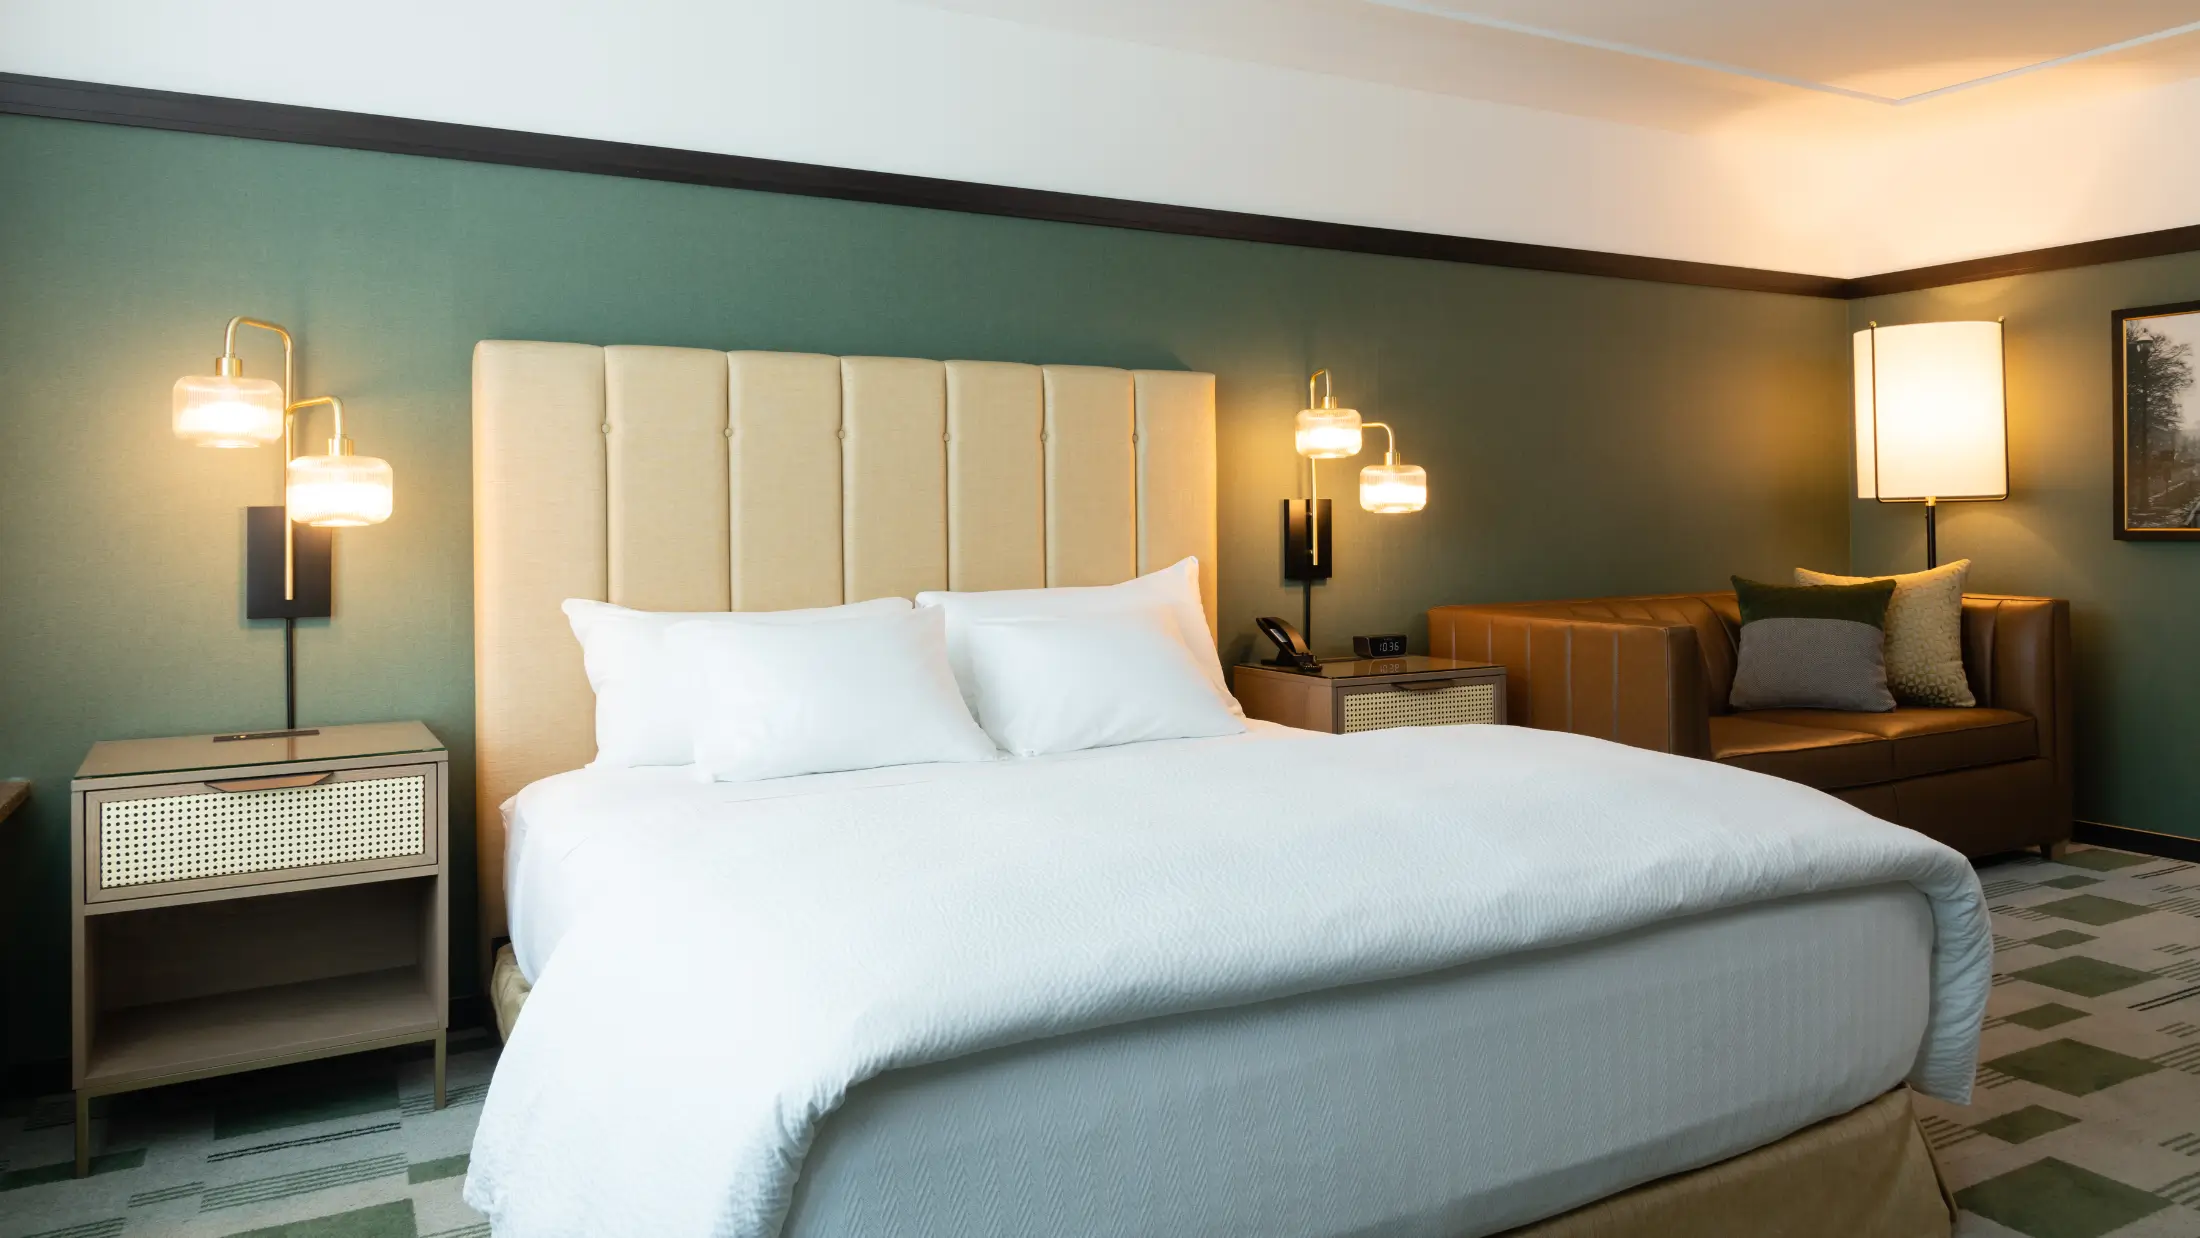 Deluxe king bed, premium linens, and tuxedo style at Six South St Hotel in Hanover, NH.